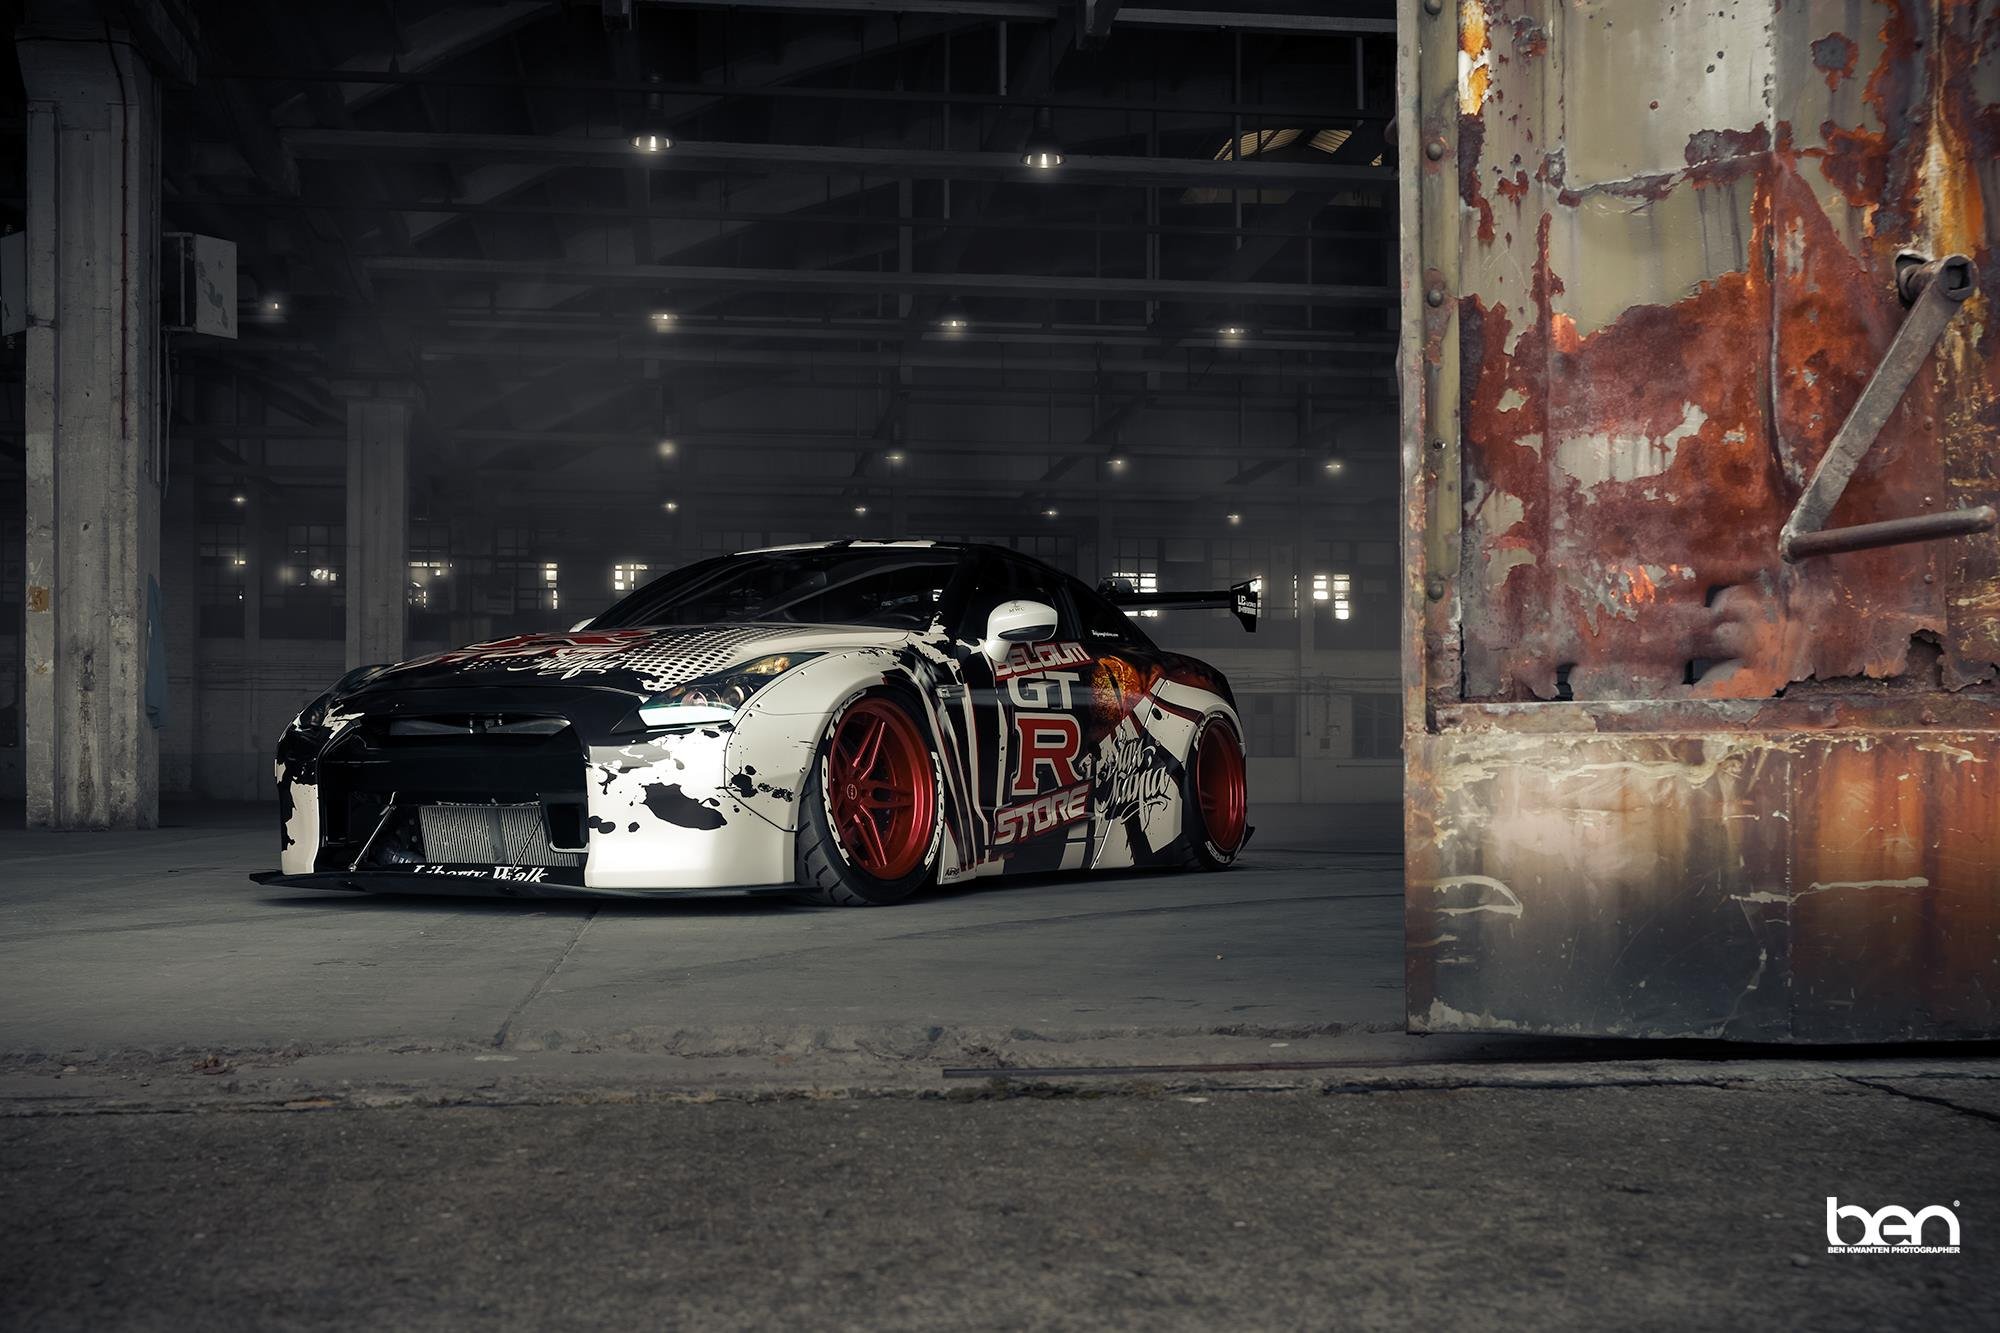 liberty, Walk, Nissan, Gt r, Cars, Coupe, Modified Wallpaper